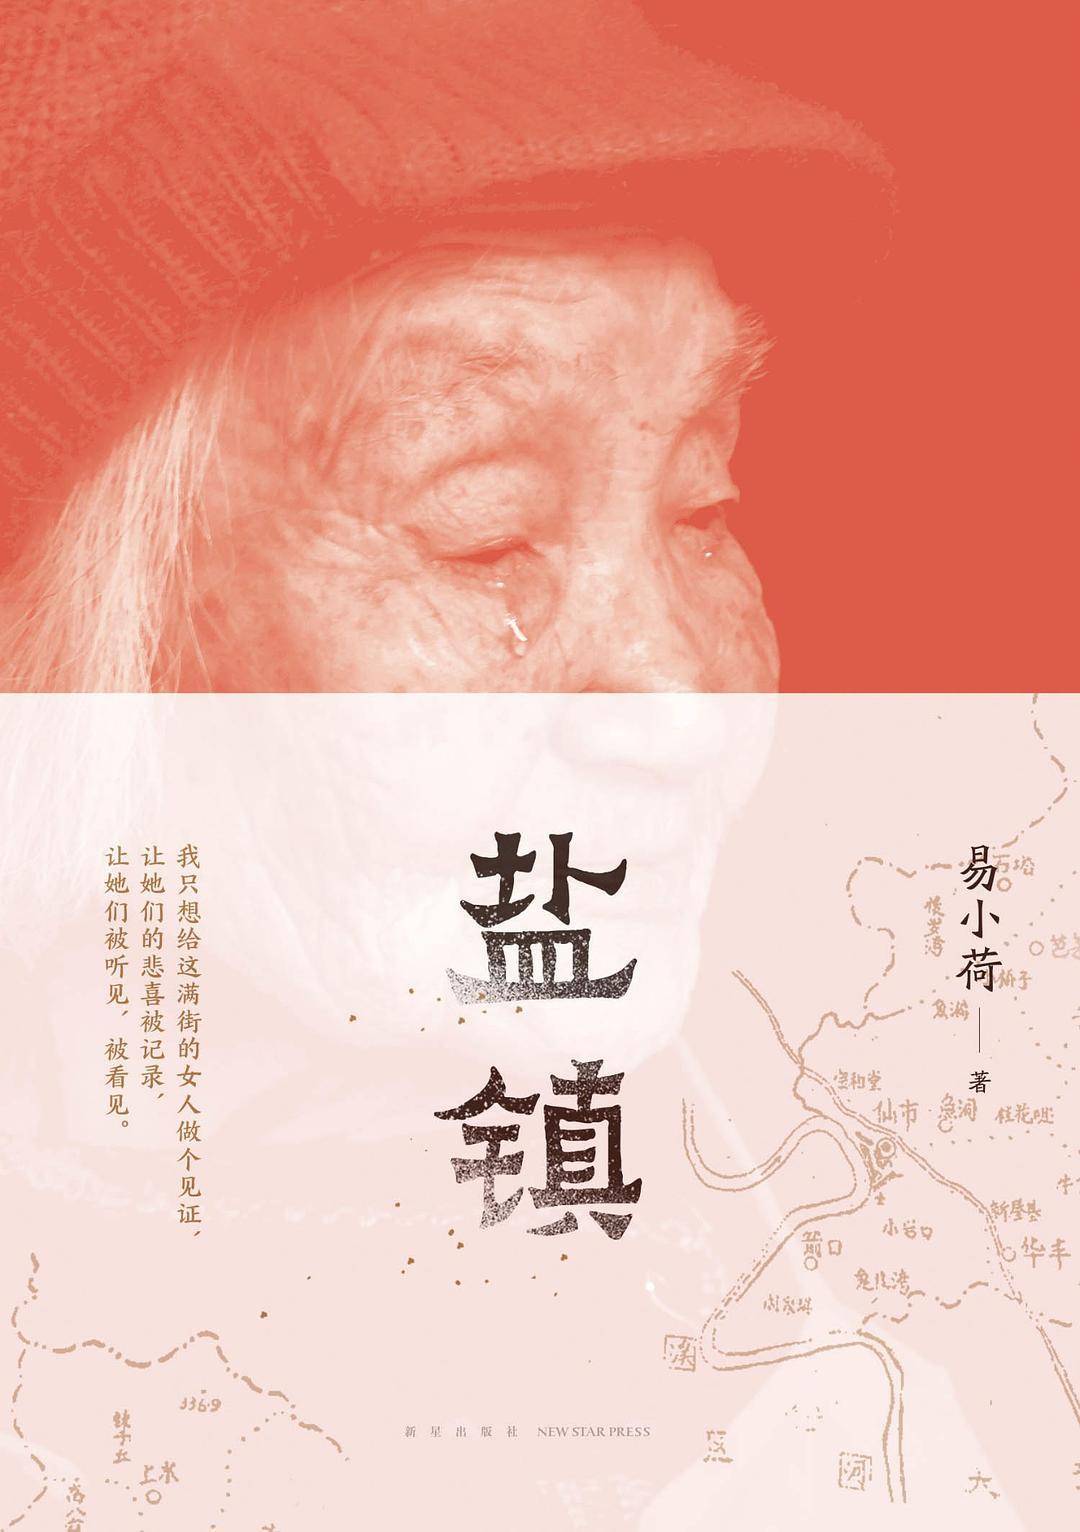 The cover of Yi Xiaohe’s new book “Salt Town” features a partial photo of an elderly woman crying at the top, against a light red background. The bottom panel has a tan background with a hand-drawn map and the author’s name at right, the book title in bold black text at center, and a short quote from the author at left, in brown text.